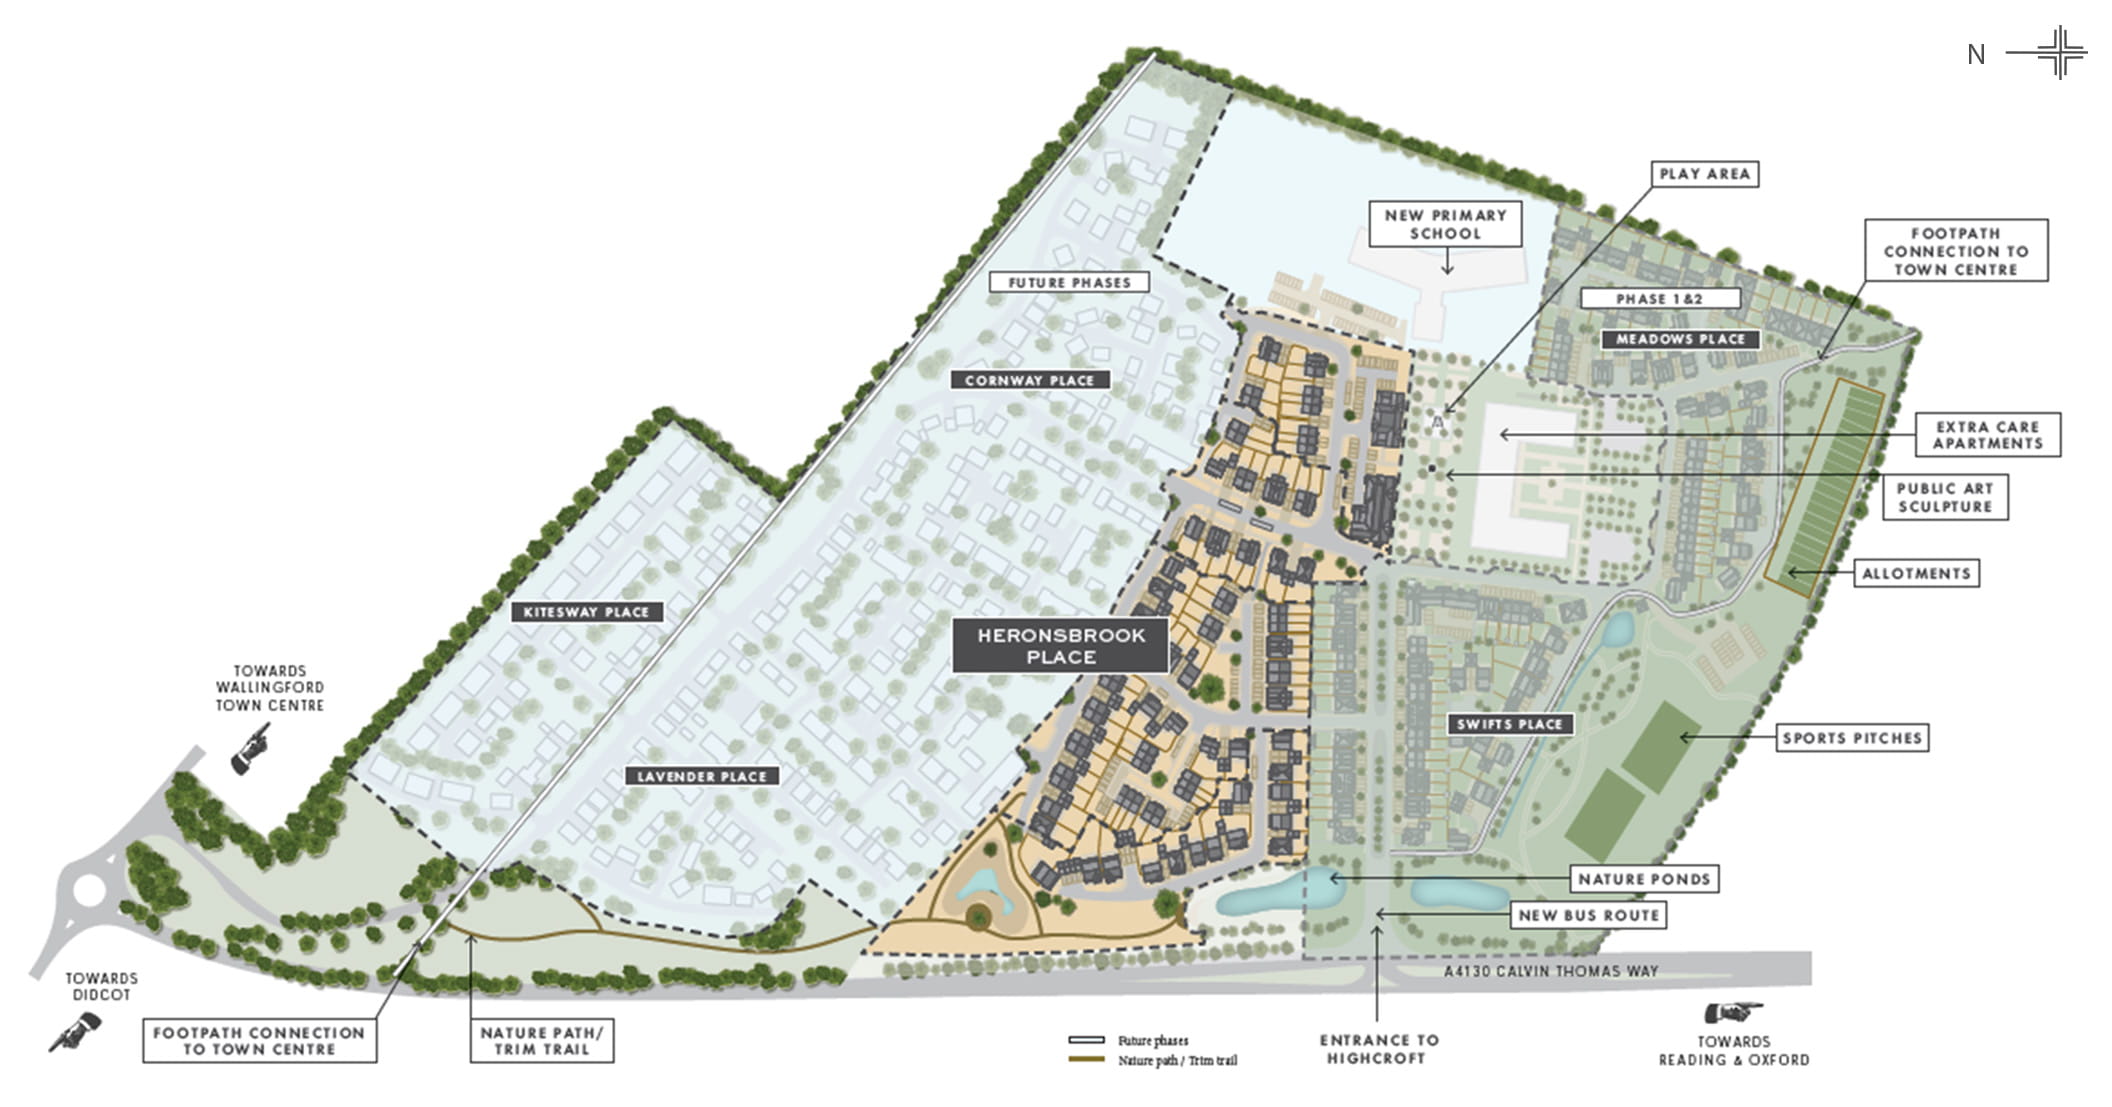 Image of overhead Site Plan at Highcroft